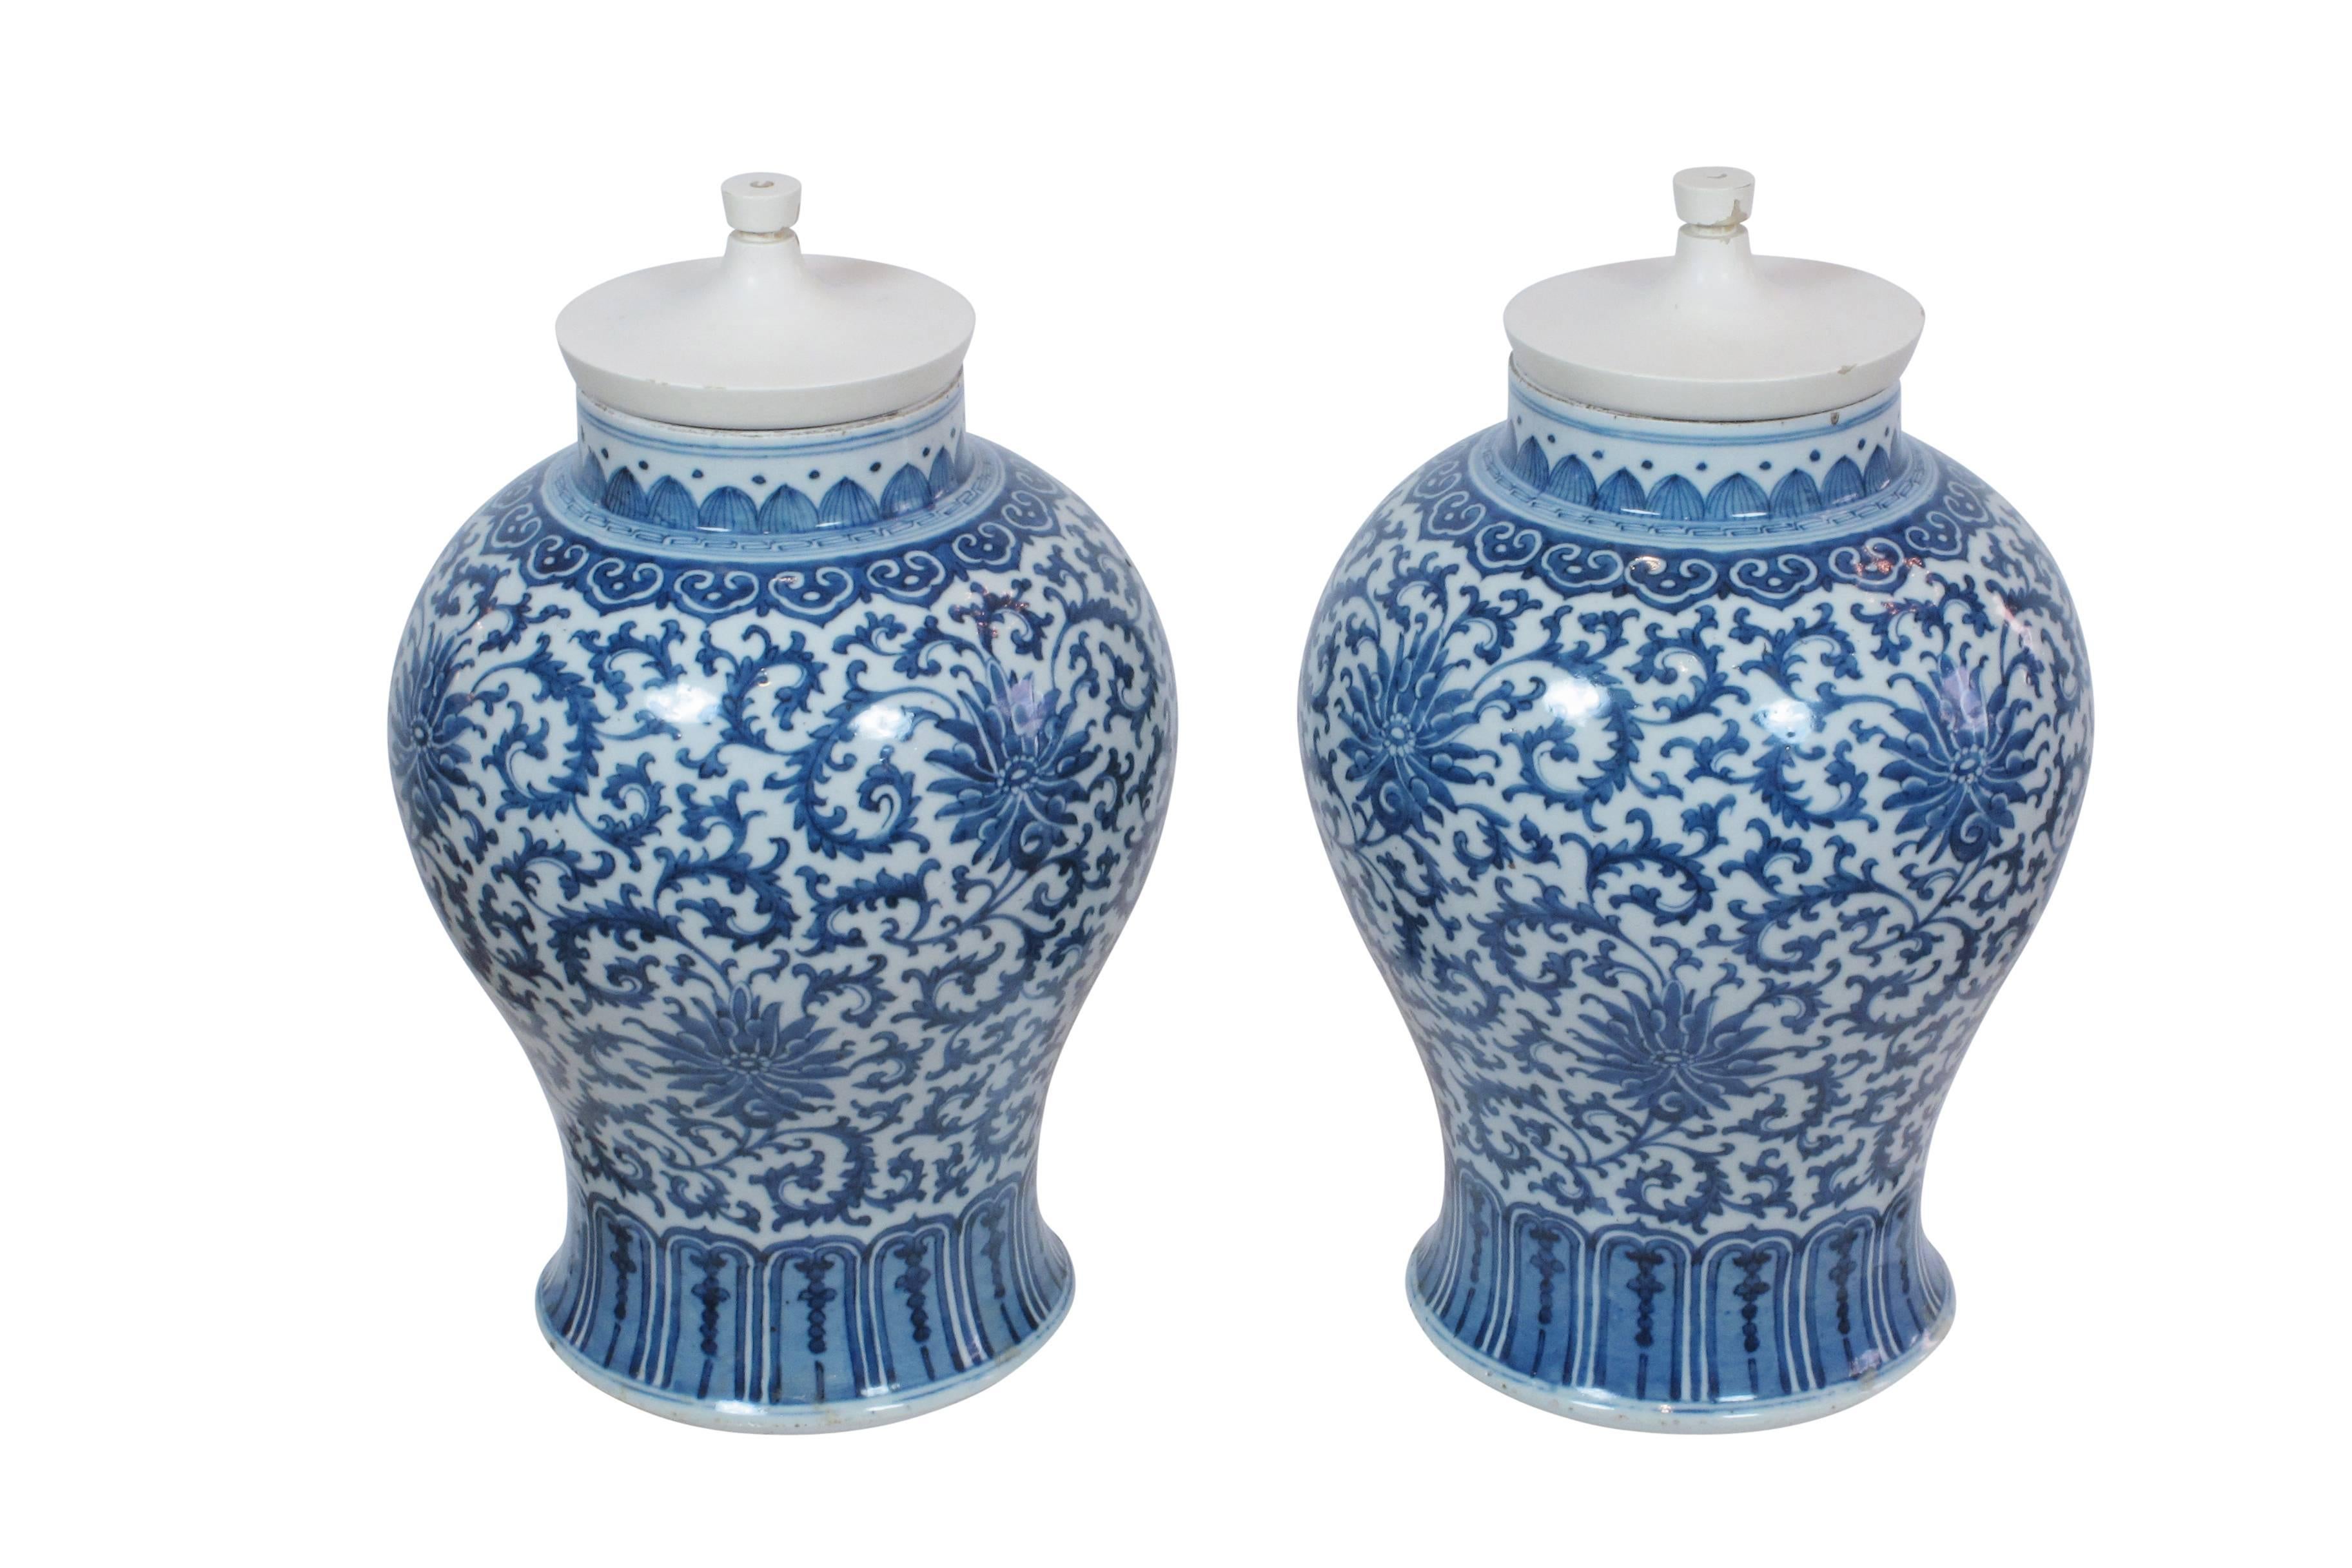 Chinese Porcelain Vases by Tommi Parzinger Blue and White Porcelain USA 1950's. As was often was the case, Parzinger repurposed or modified items made by others and incorporated them into his interiors. Parzinger selected these handsome blue and